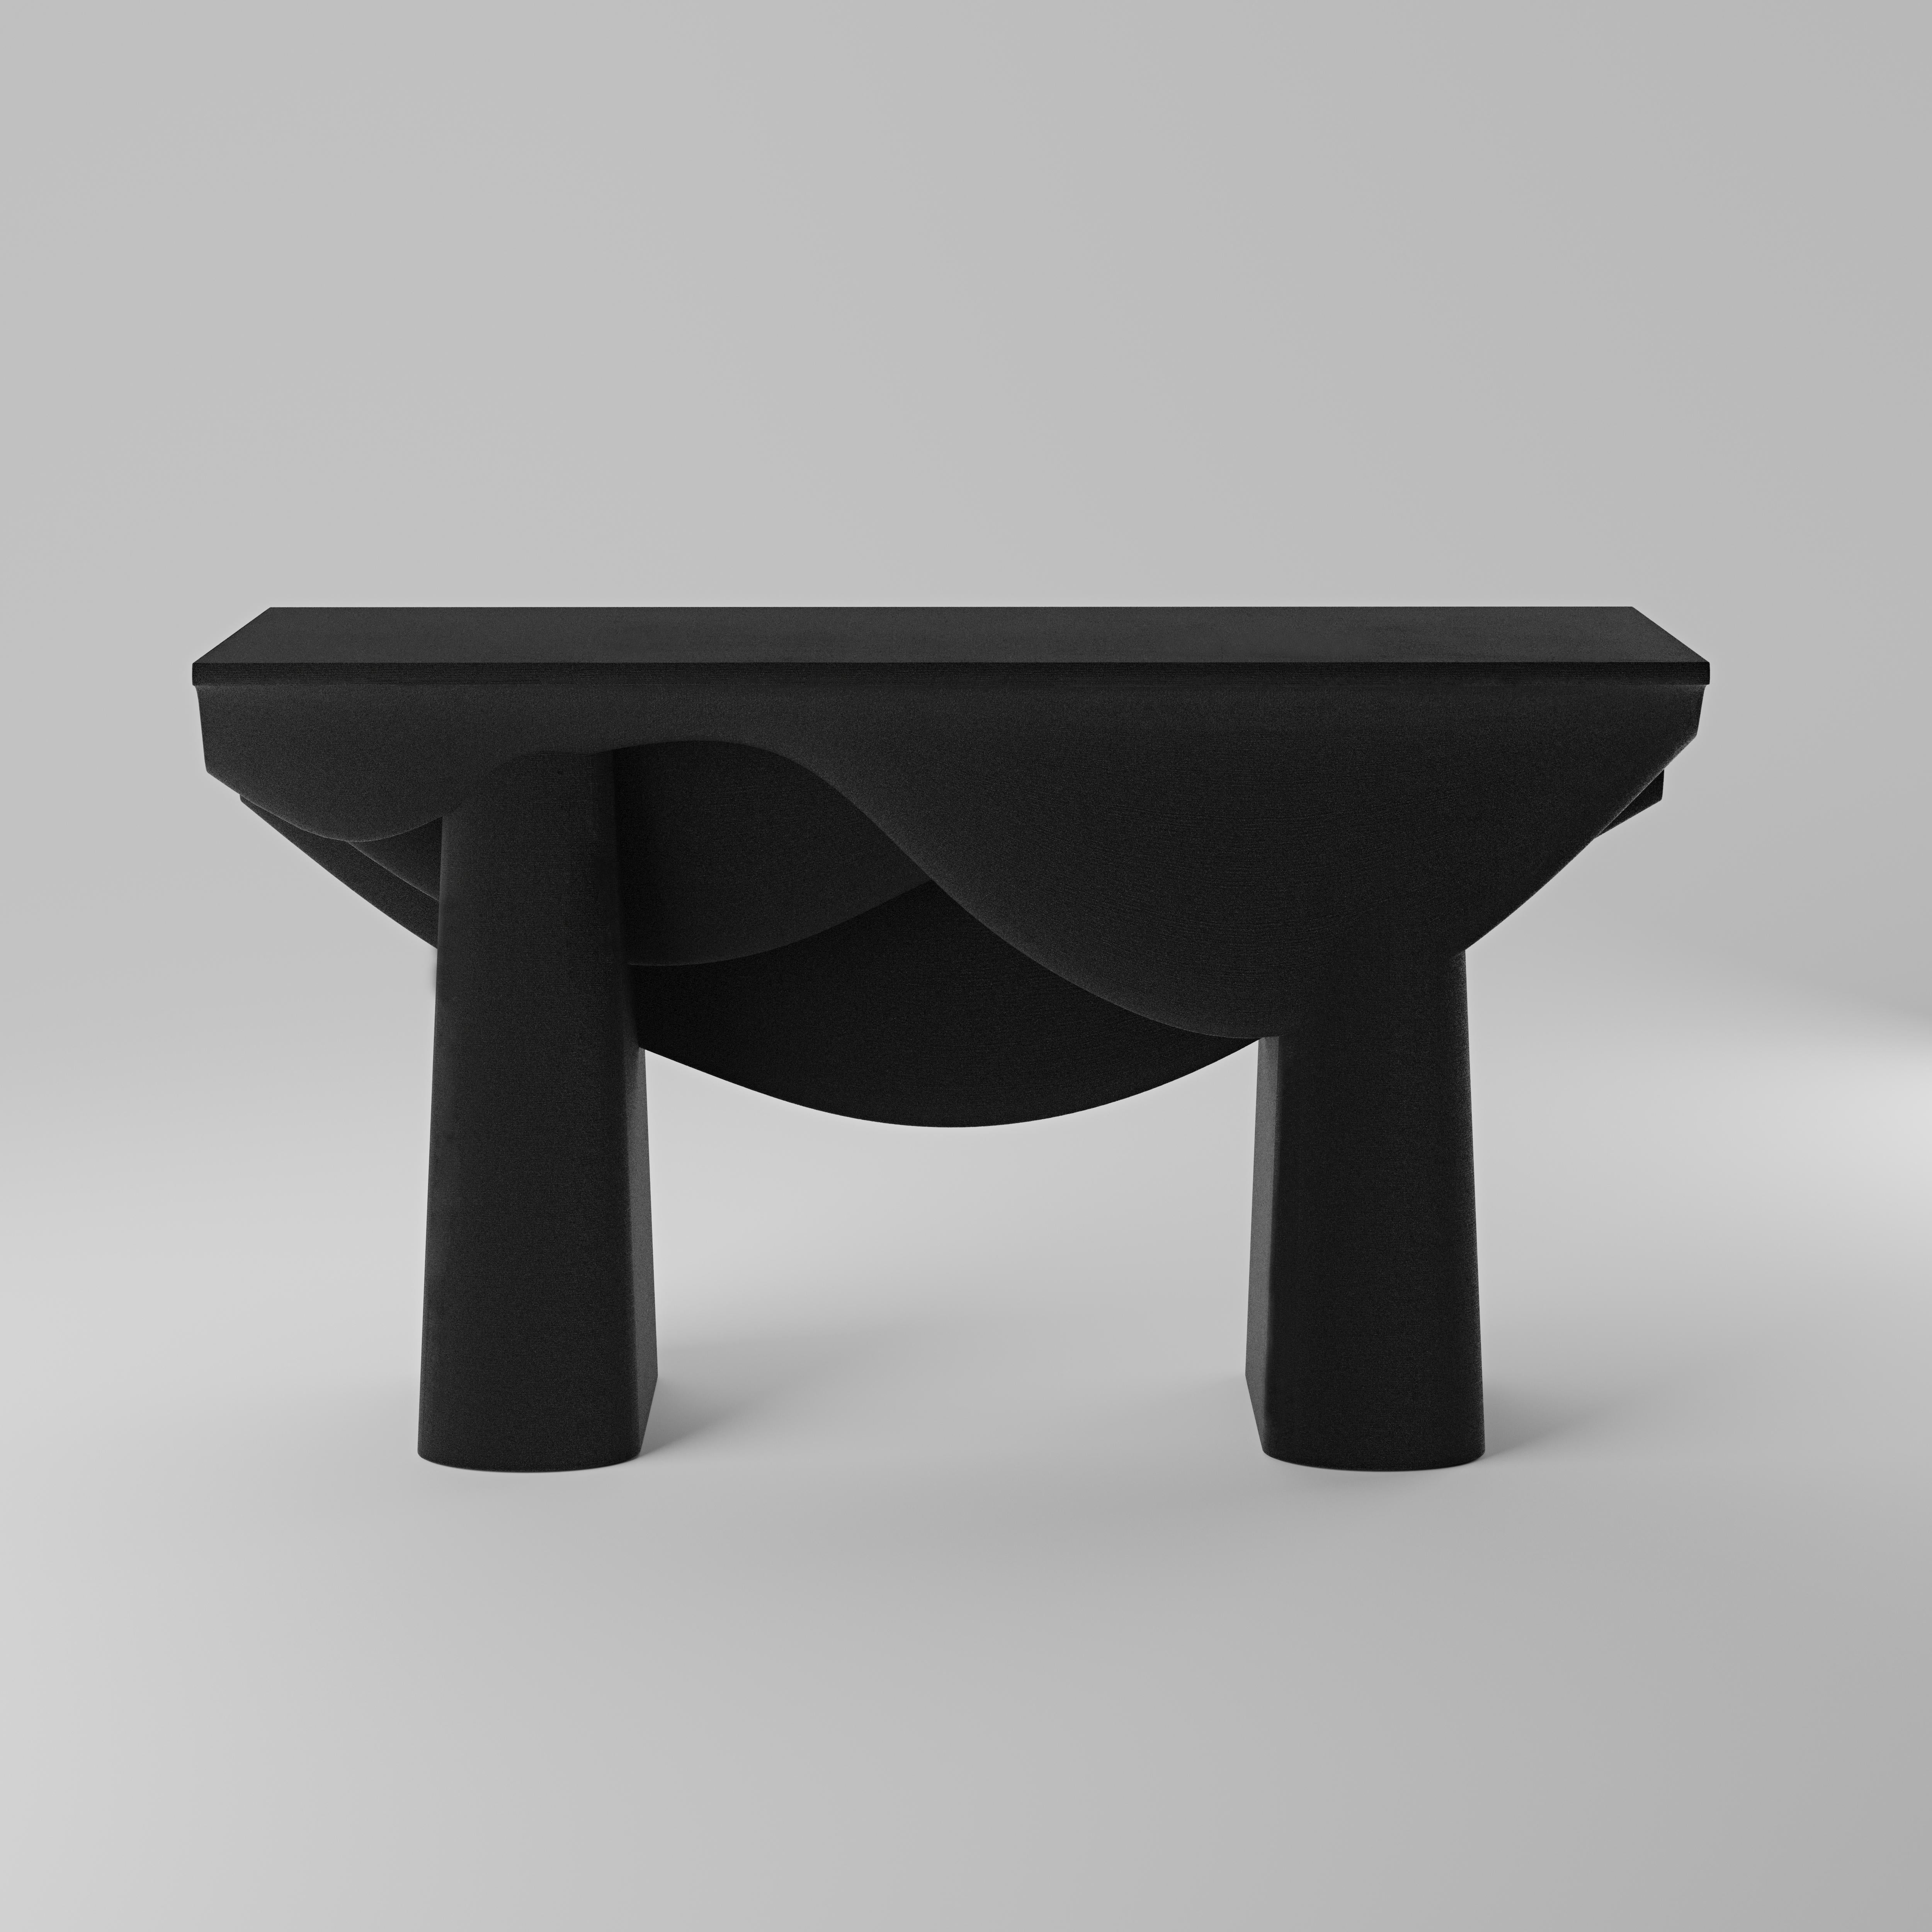 Made-to-order
Contourage quartz sand
Console table by Johan Wilén

The Swedish designer's latest striking creation—a console table like no other. Utilising innovative 3D printing technology and quartz sand, intertwining organic forms and the rugged